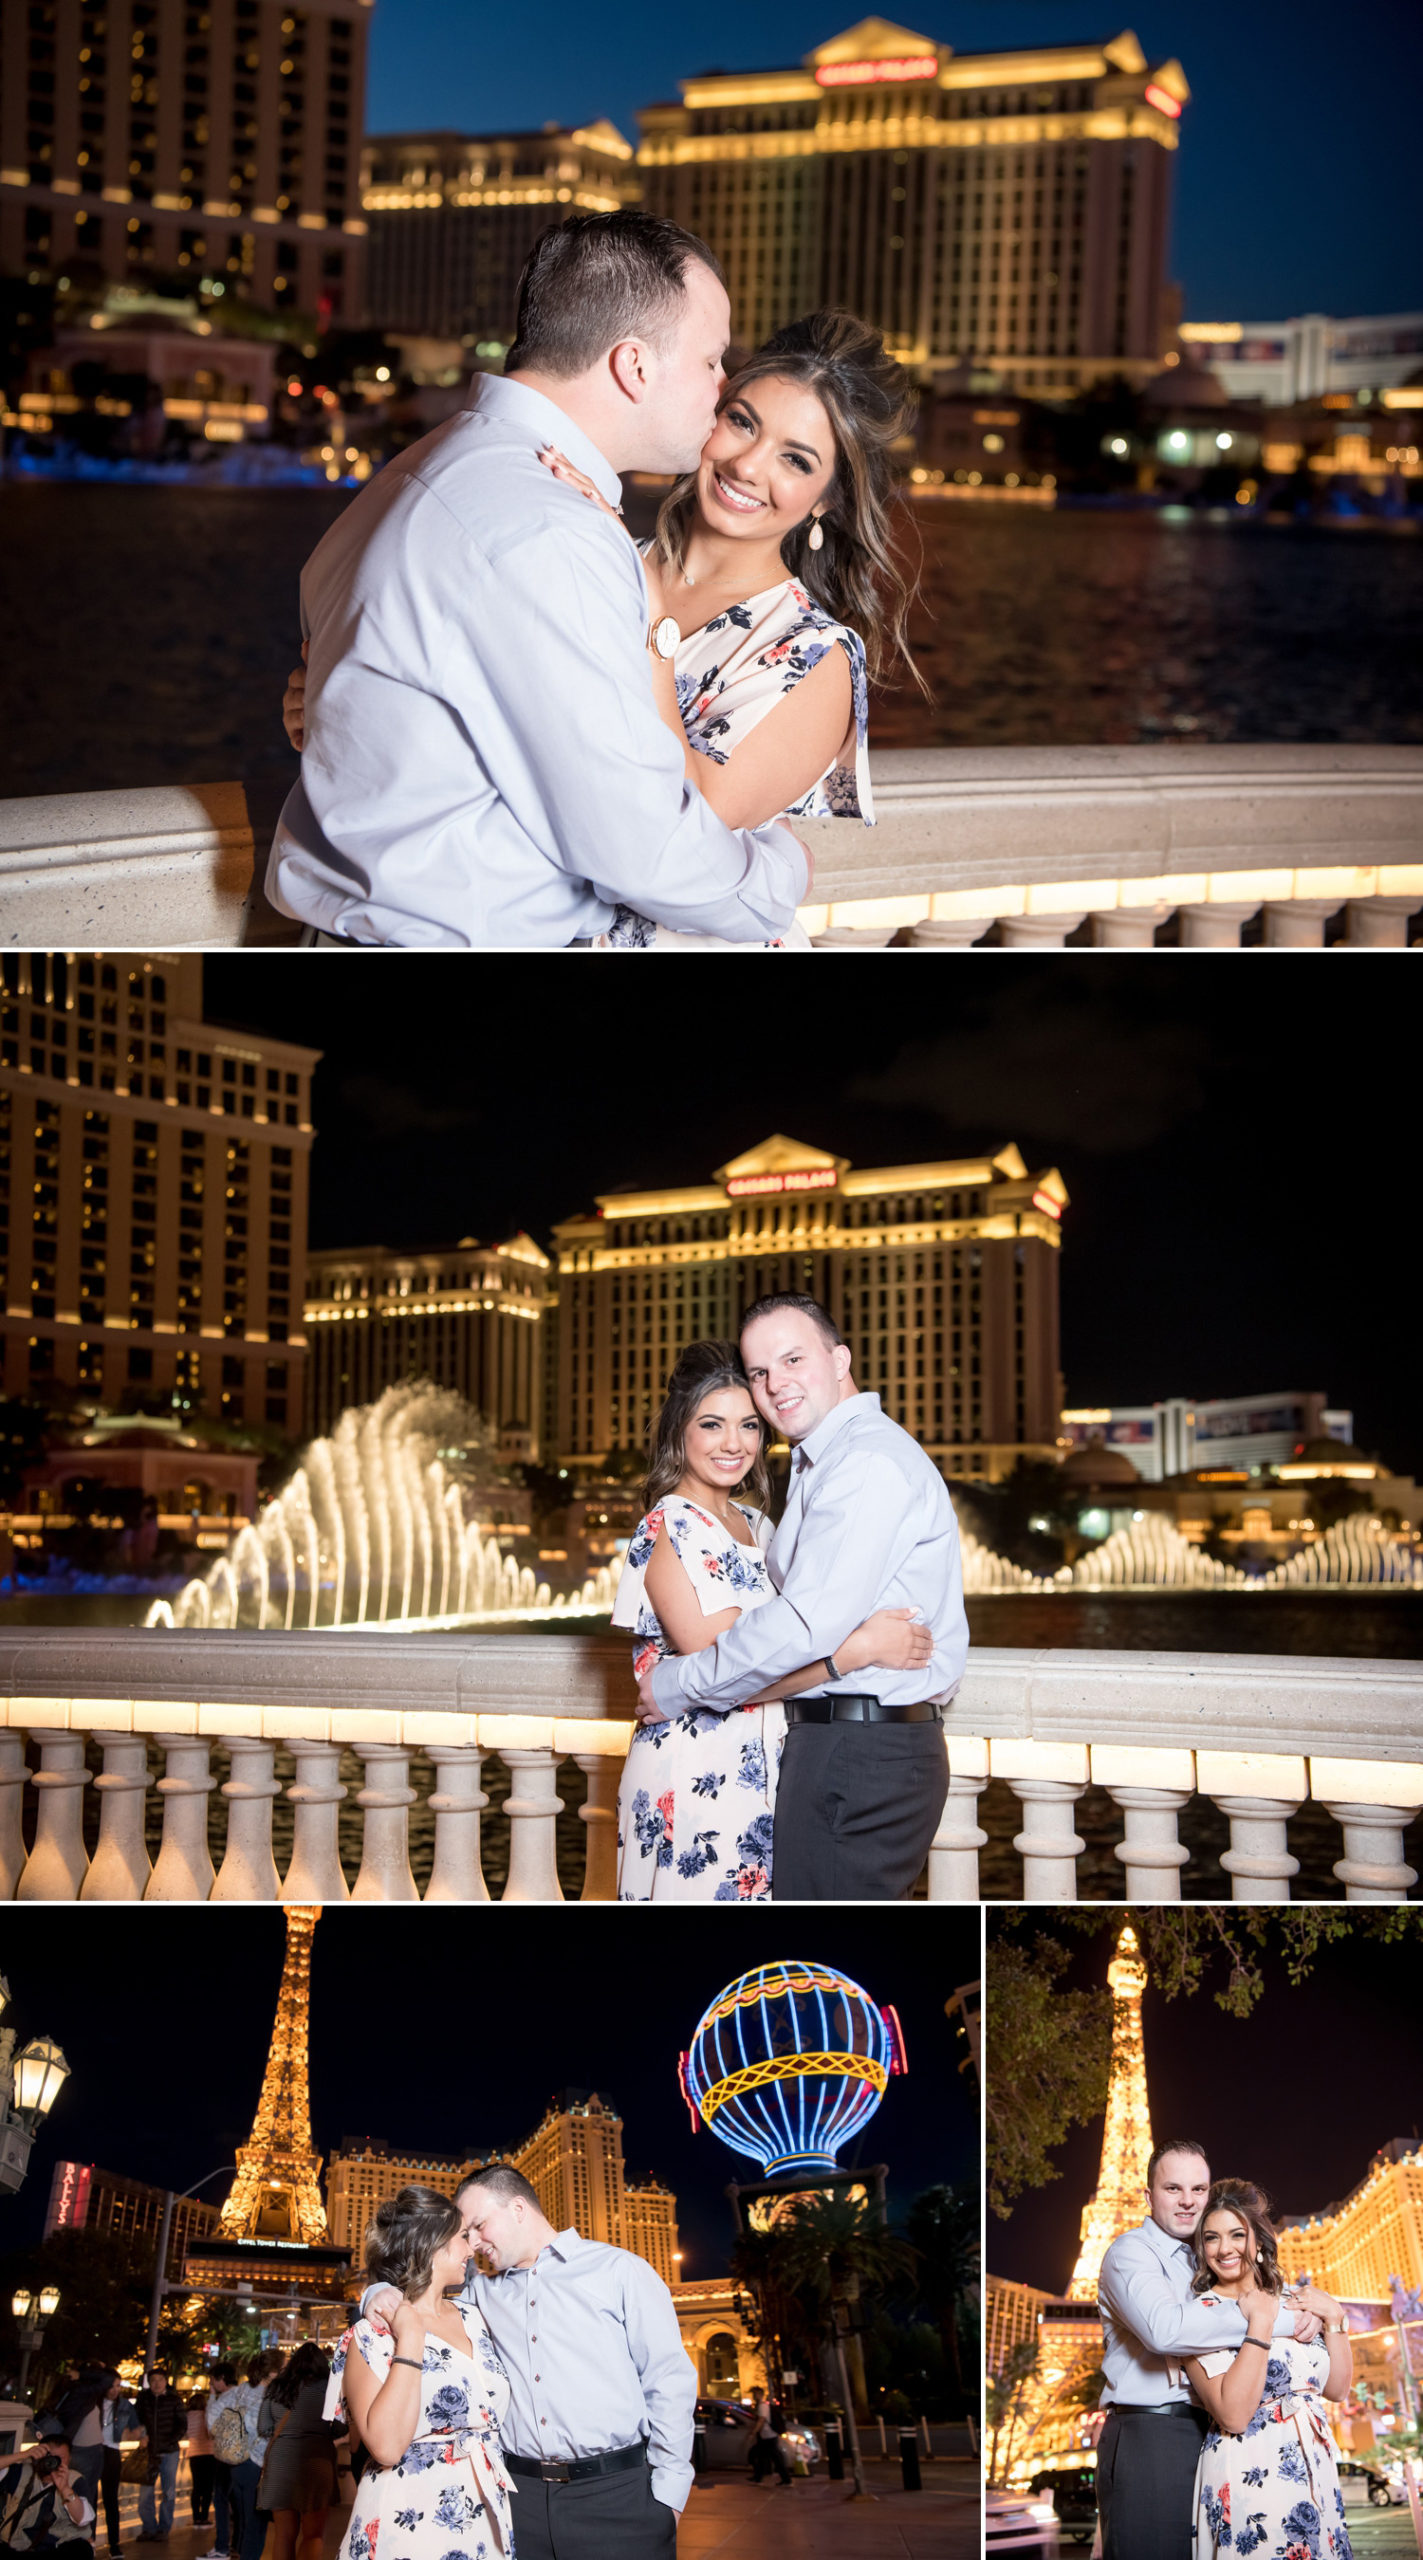 Las Vegas Strip Engagement Session | Kristen Marie Weddings + Portraits | Location Available for Full-Day Wedding Clients